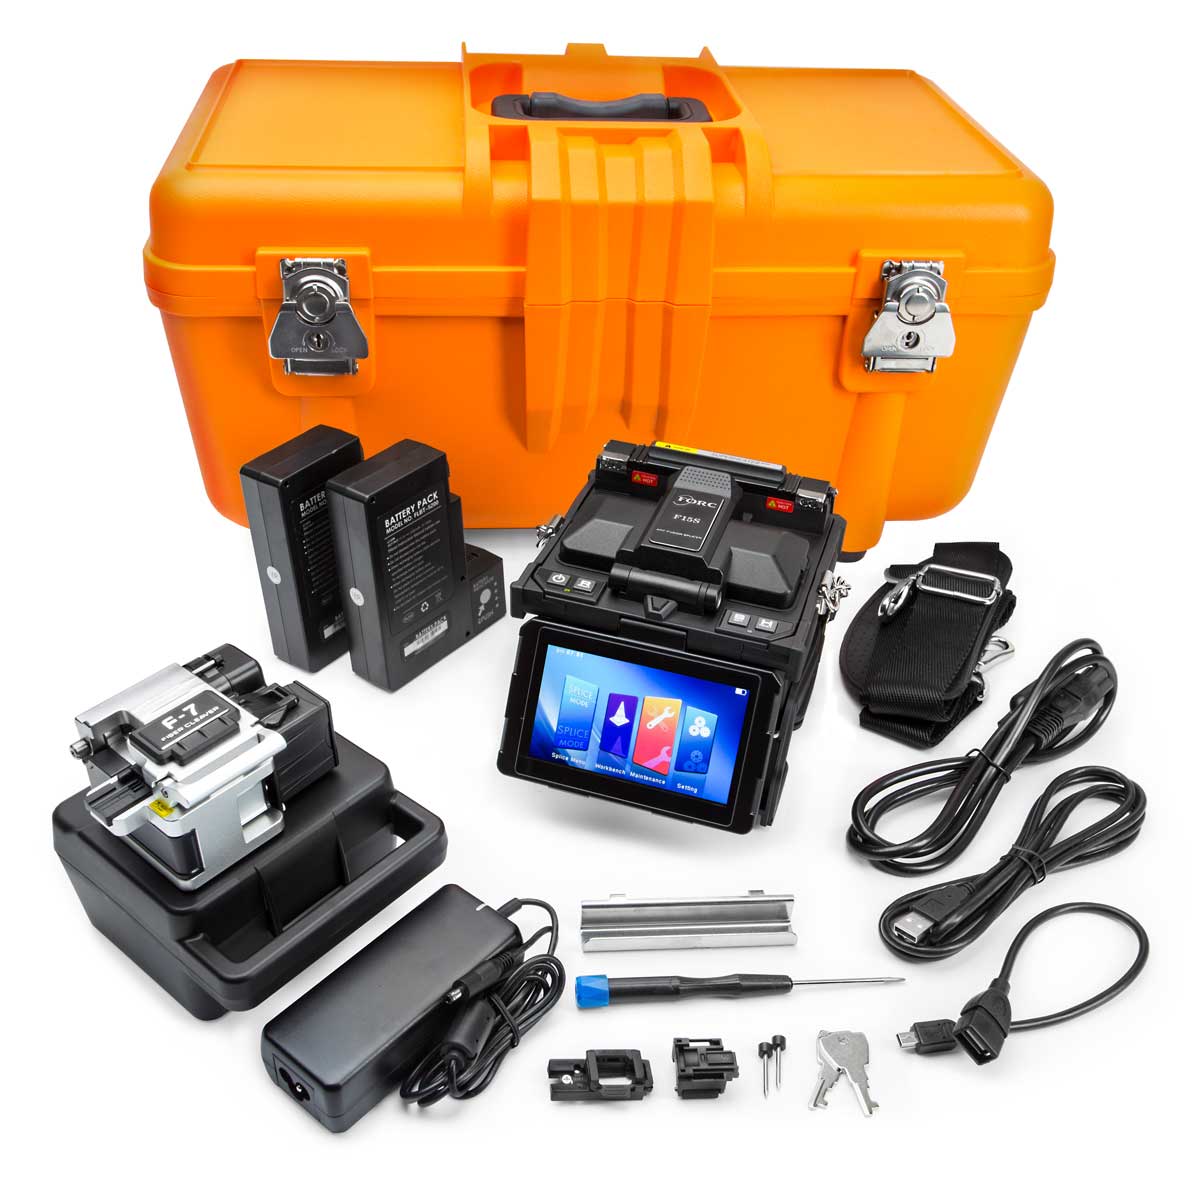 FORC F15S Core Alignment Splicer Kit